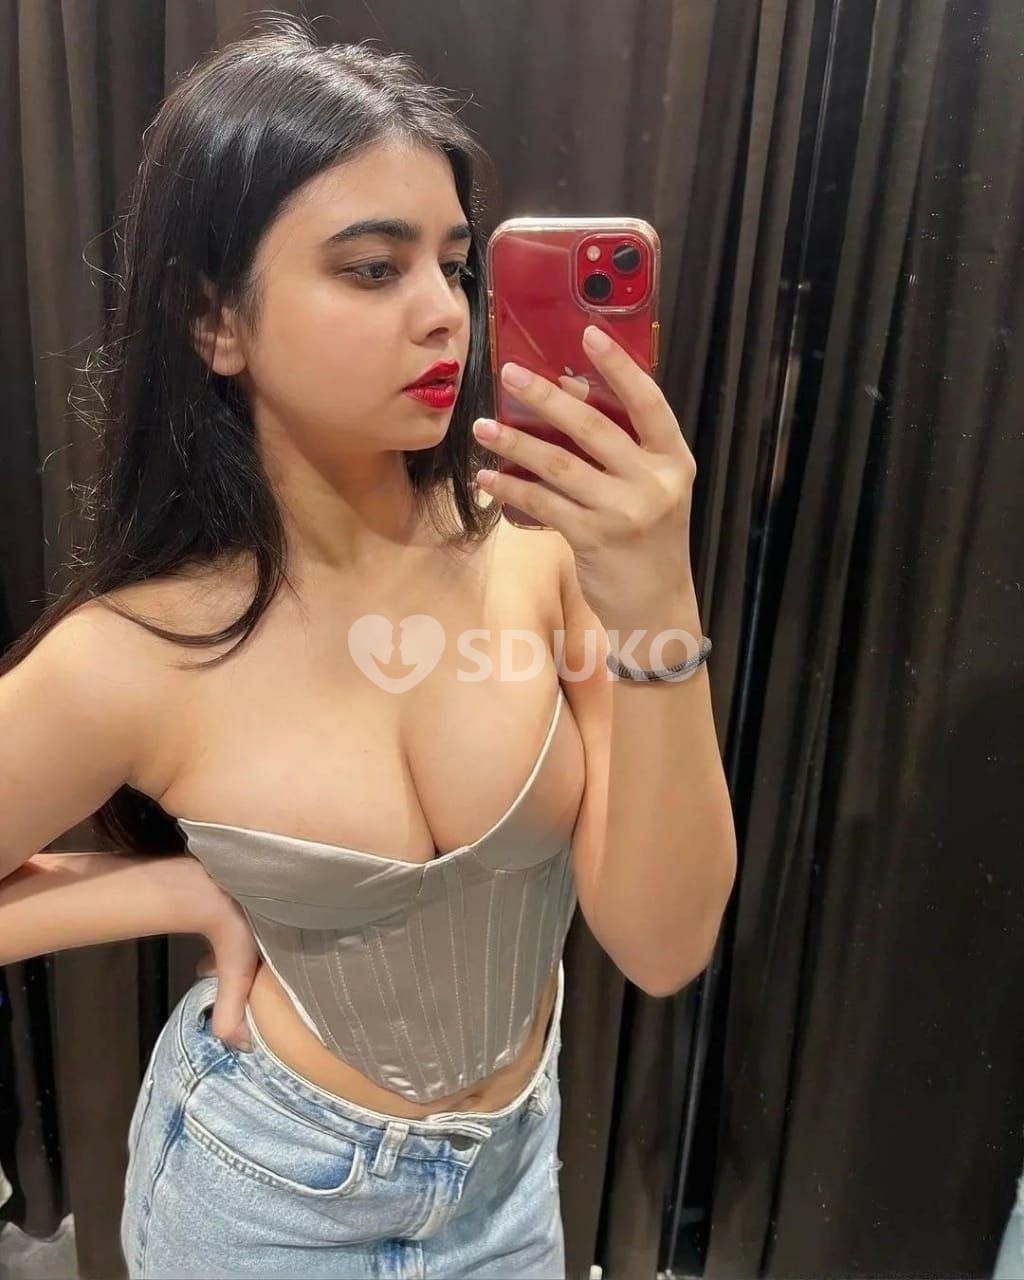 Bangalore vip genuine in ⭐⭐⭐💯 Royal Eskort Sarvice Safe and secure service low price High profile girls.n1